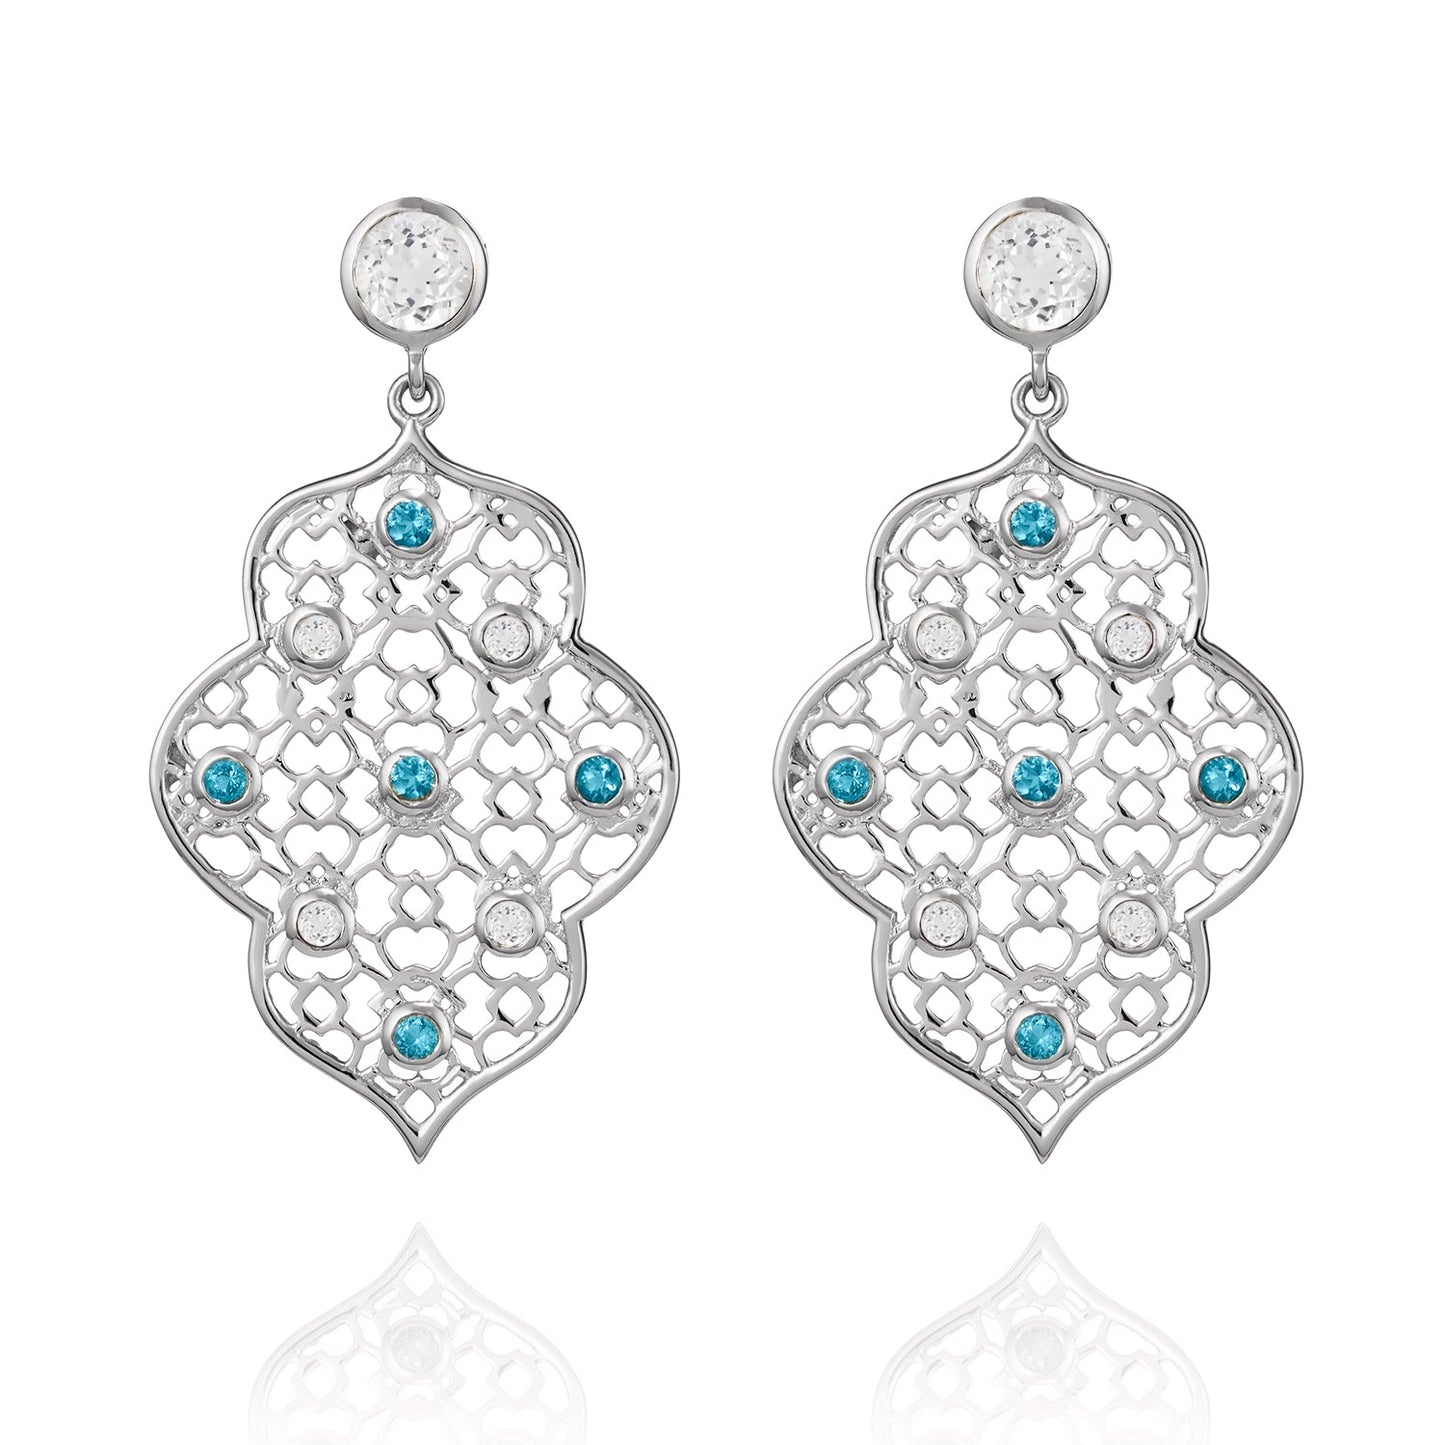 Load image into Gallery viewer, London-made luxury custom gold gemstone jewellery - Silver Filigree Earrings in White Topaz and Blue Topaz – Andalusian Collection, Augustine Jewellery, British Jewellers, Gemstone Jewellery, Luxury Jewellery London.
